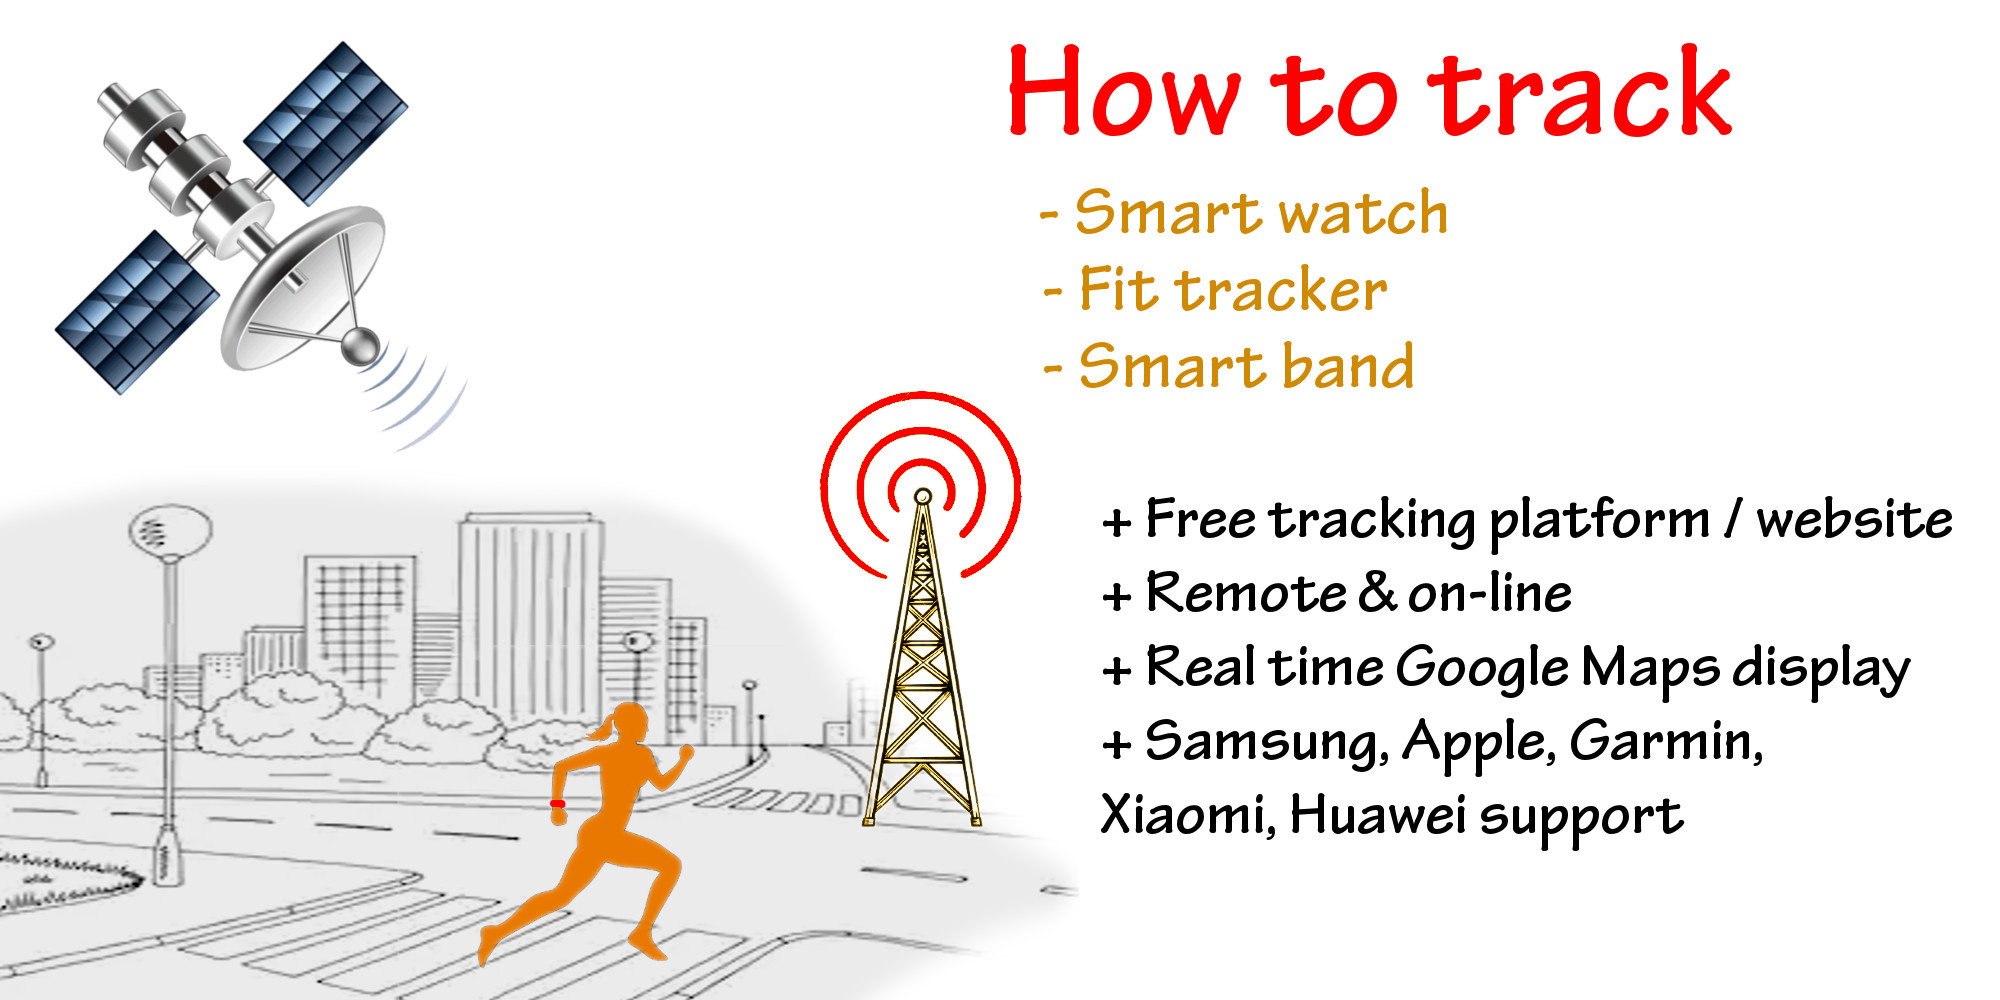 How to track smart watch or sport tracker - Samsung & Apple watch